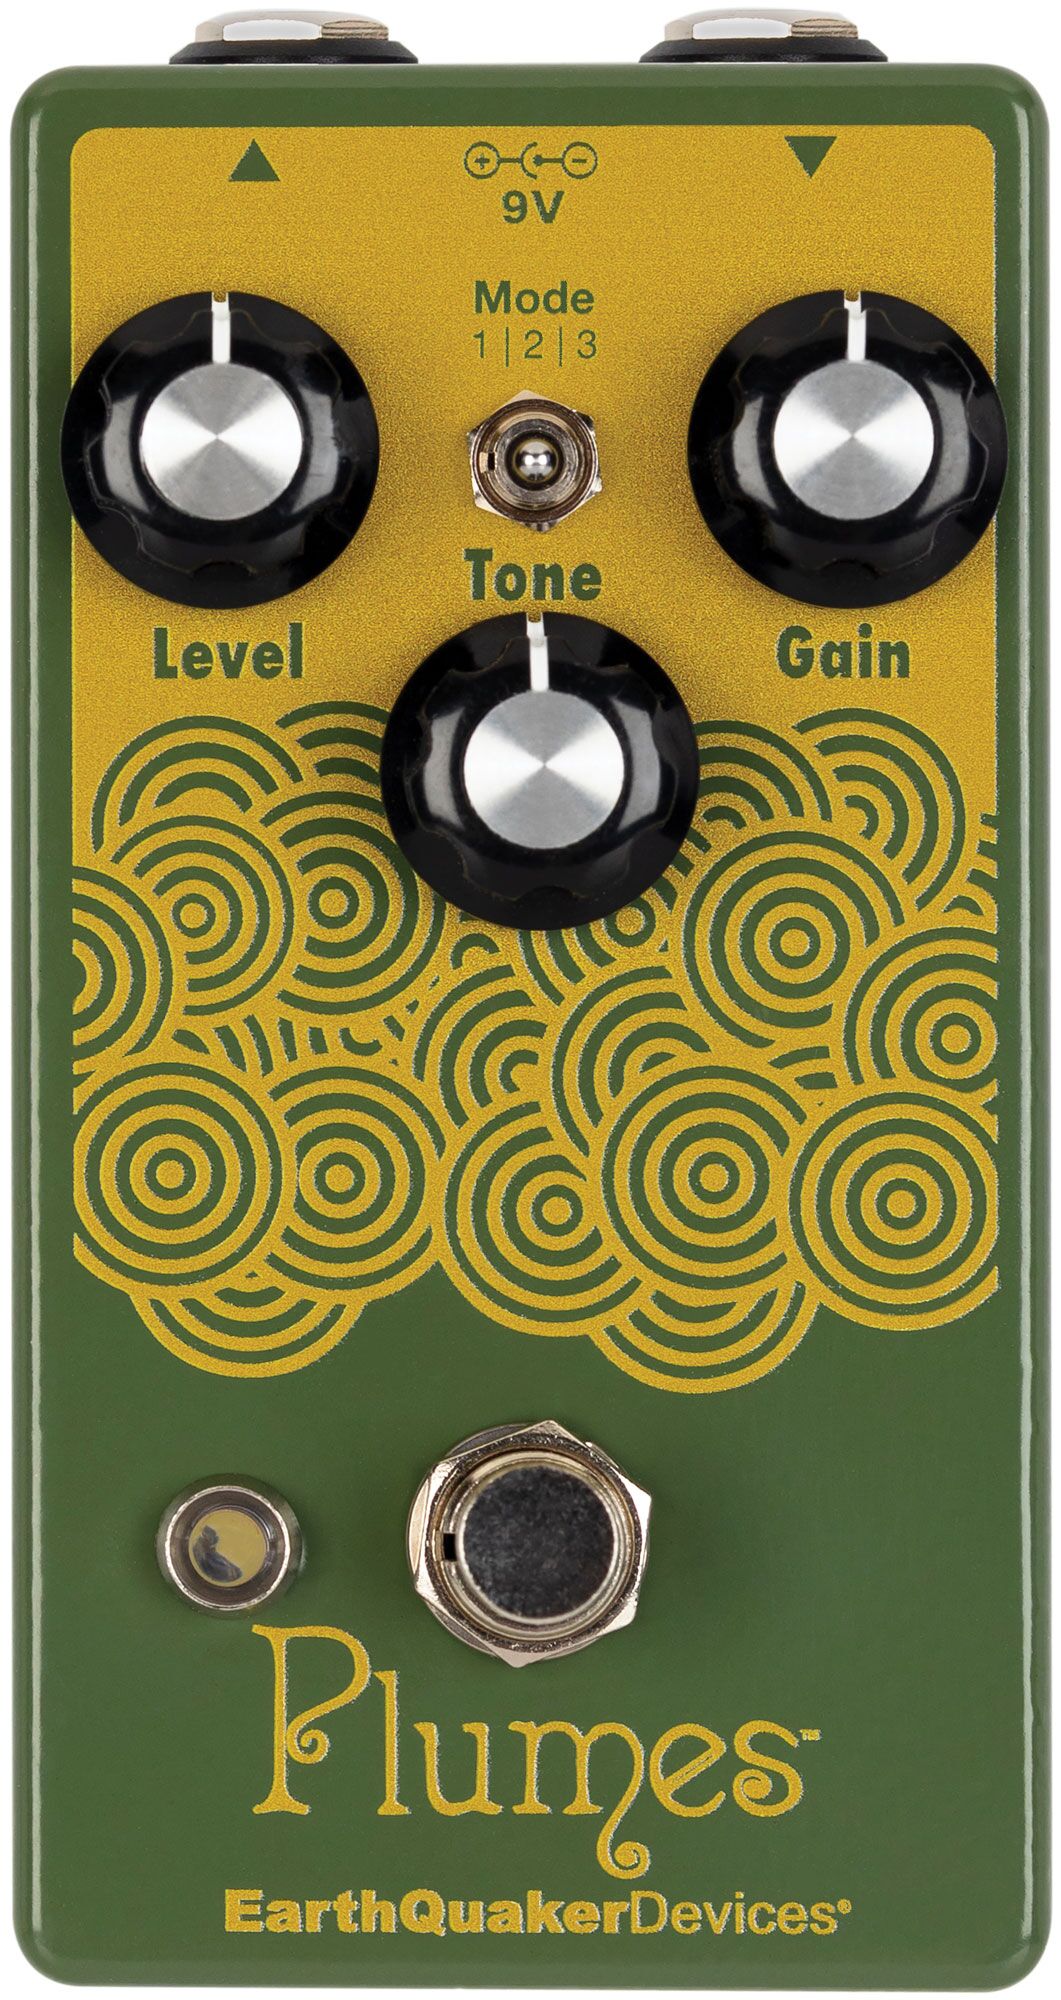 Gear Review: Plumes by EarthQuaker Devices